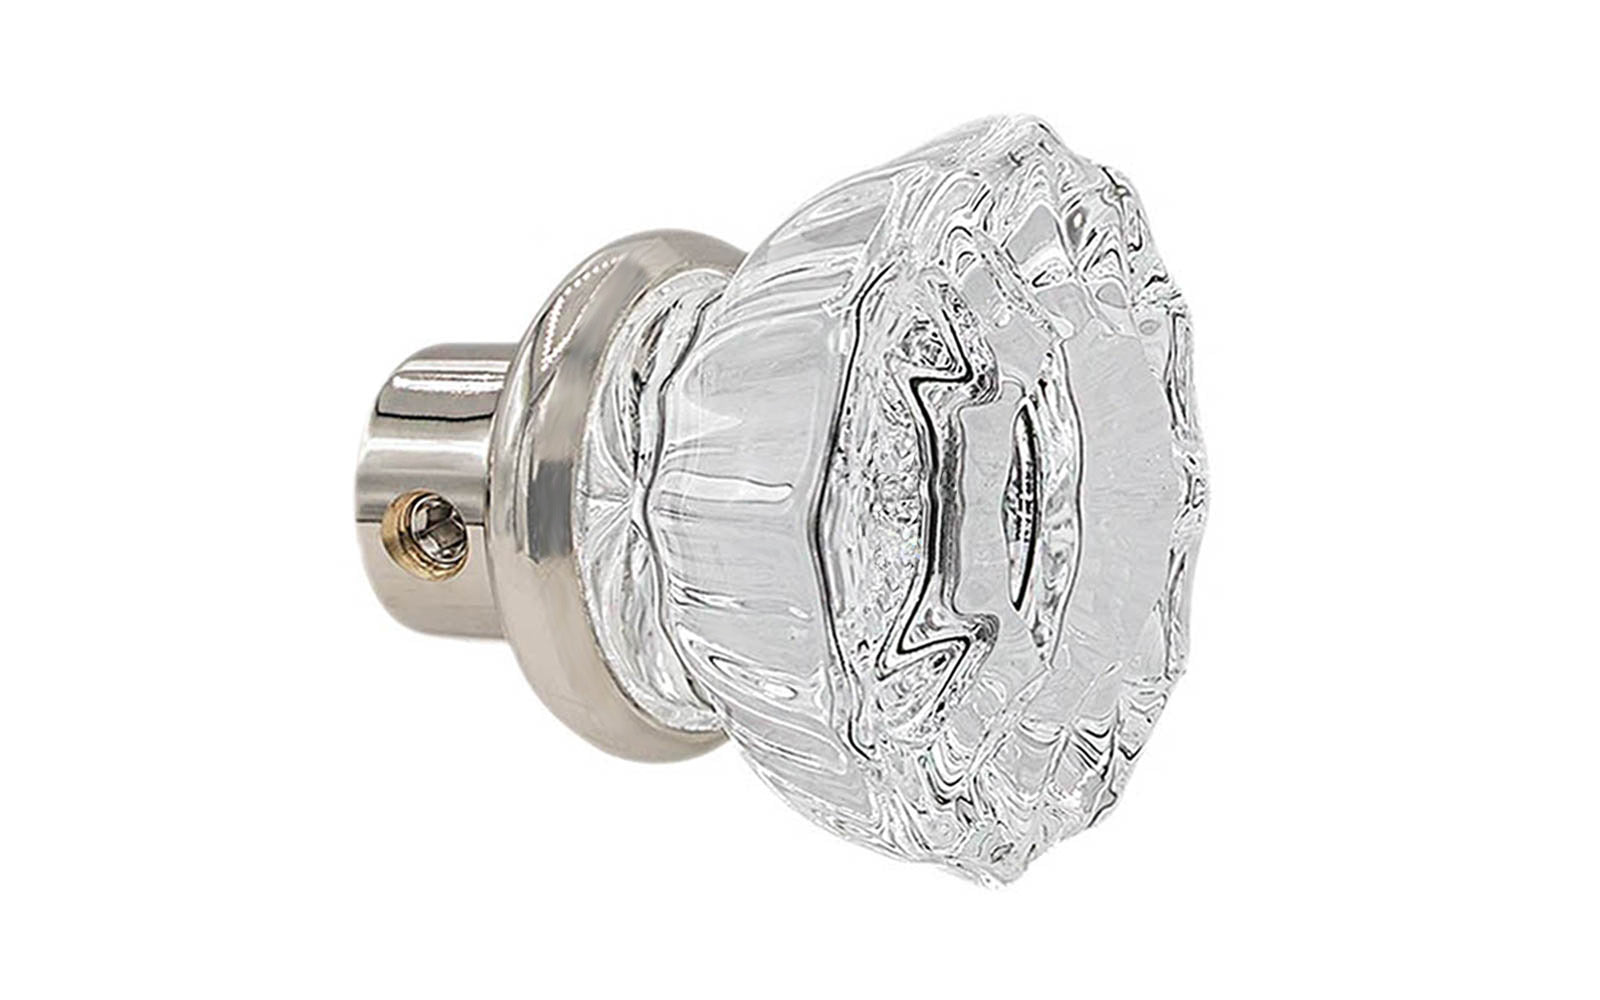 Single Classic Fluted Clear Glass Doorknob. A high quality & genuine glass doorknob with an attractive fluted design. The sparkling center point under glass amplifies reflected light to showcase beautiful facets. Solid brass base. Reproduction Glass Door Knobs. Traditional Fluted Glass Knobs. One knob. Polished Nickel Finish.